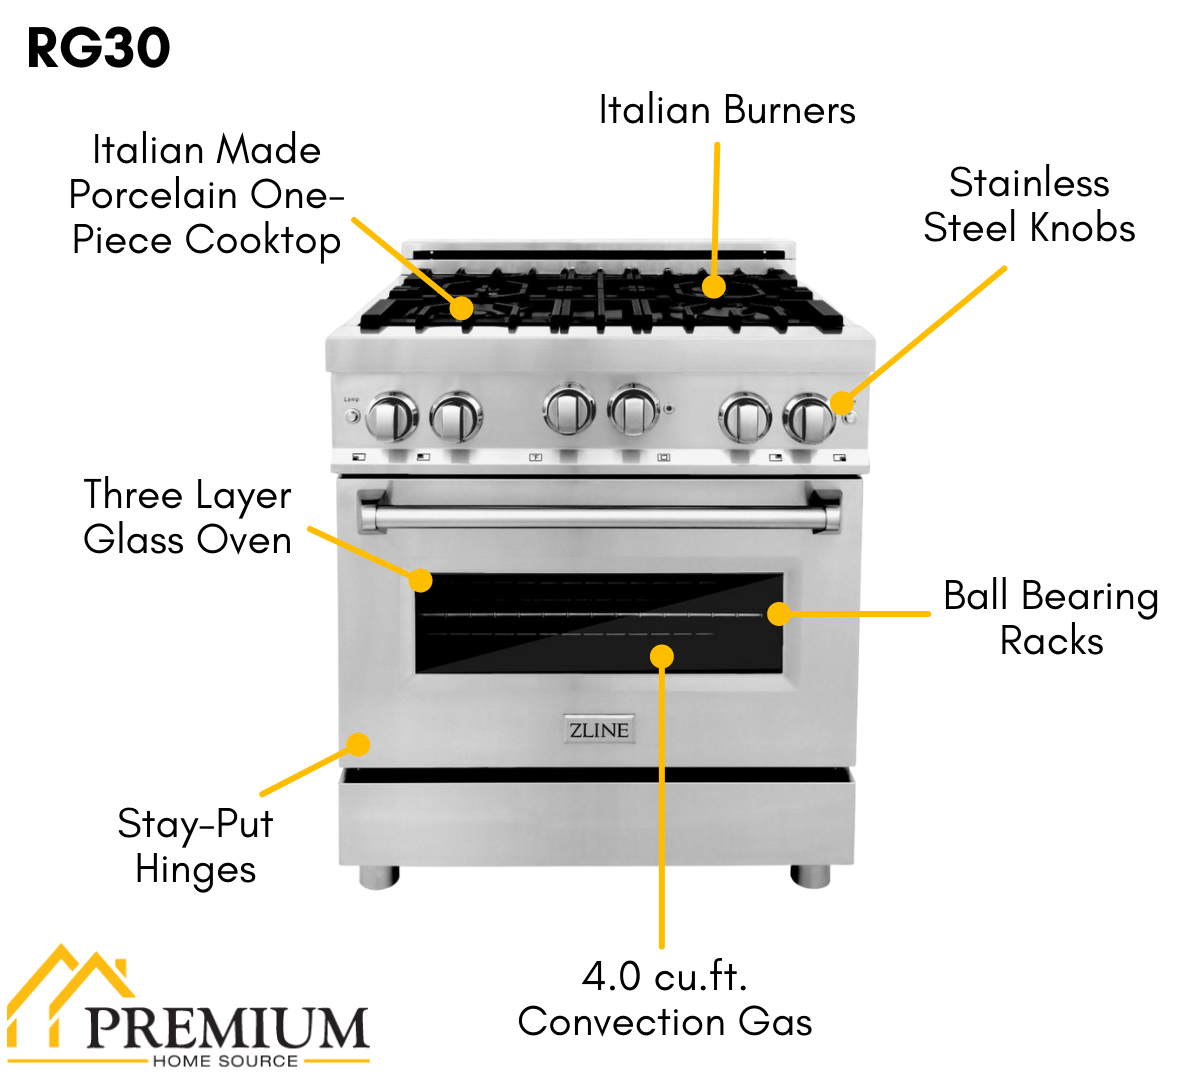 ZLINE 30" Kitchen Package with Stainless Steel Gas Range, Convertible Vent Range Hood and Microwave Drawer